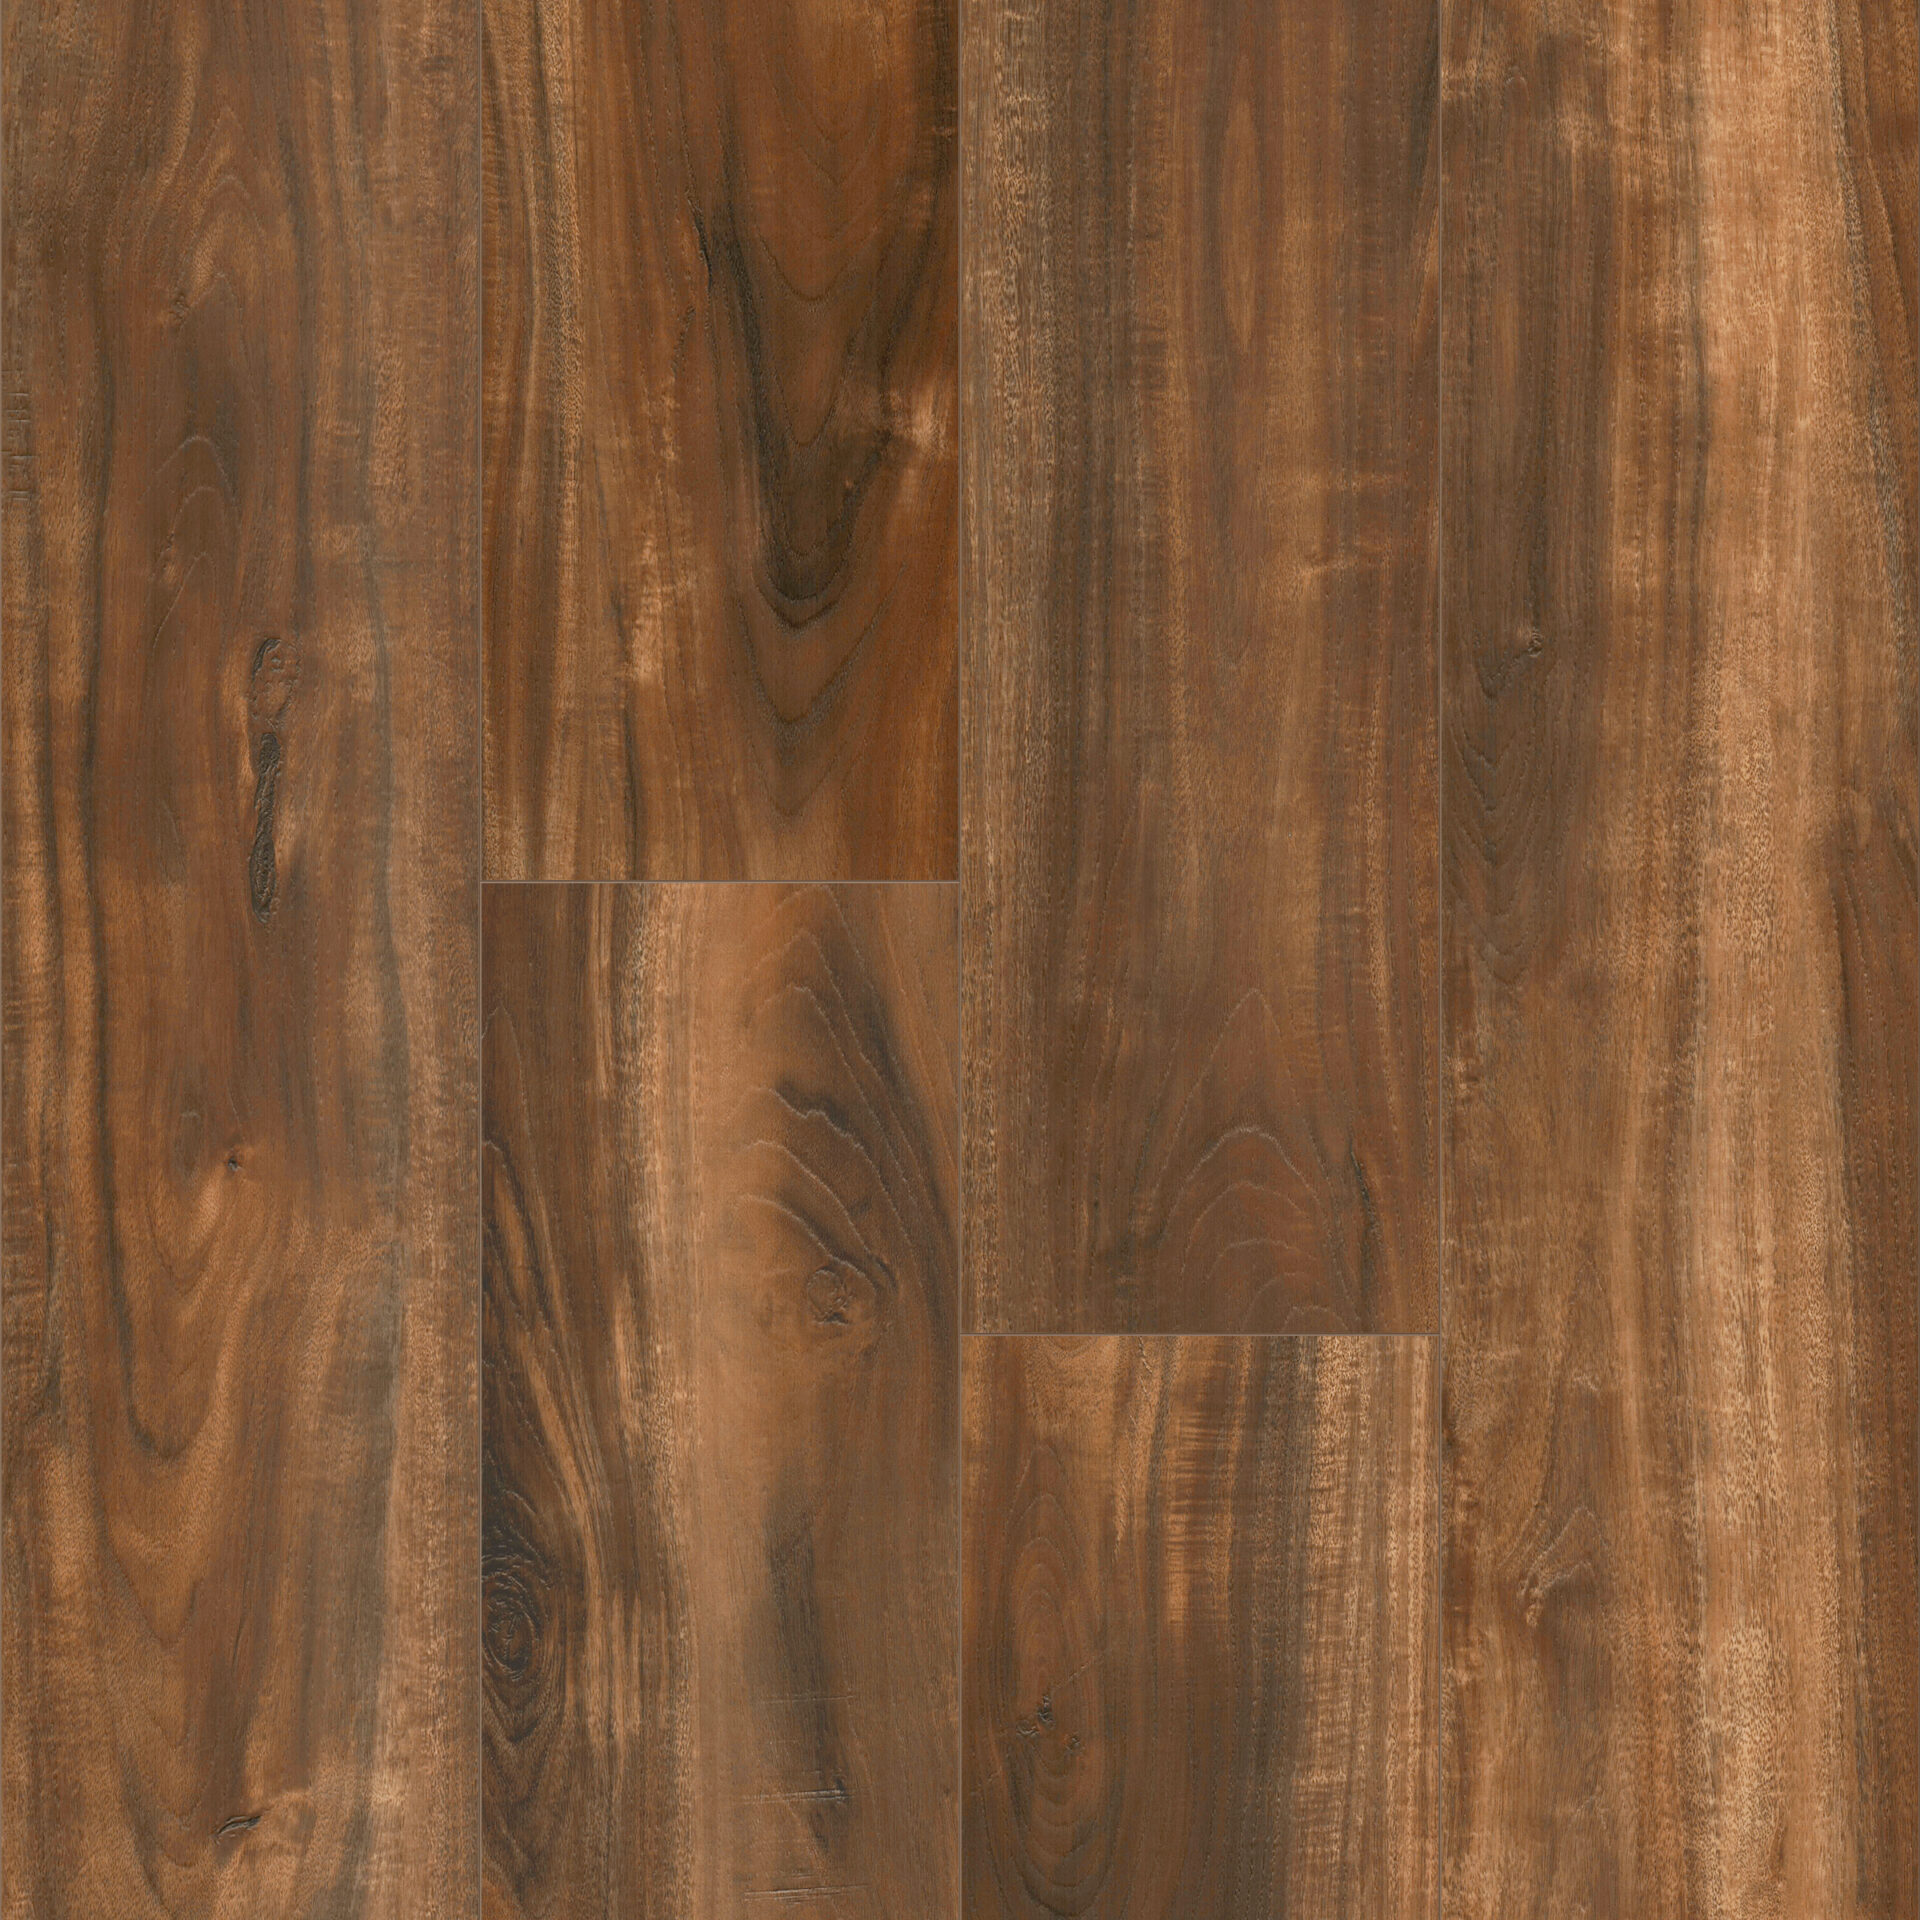 Southwind Colonial Plank *1007 Oyster Grey* - LaValle Flooring